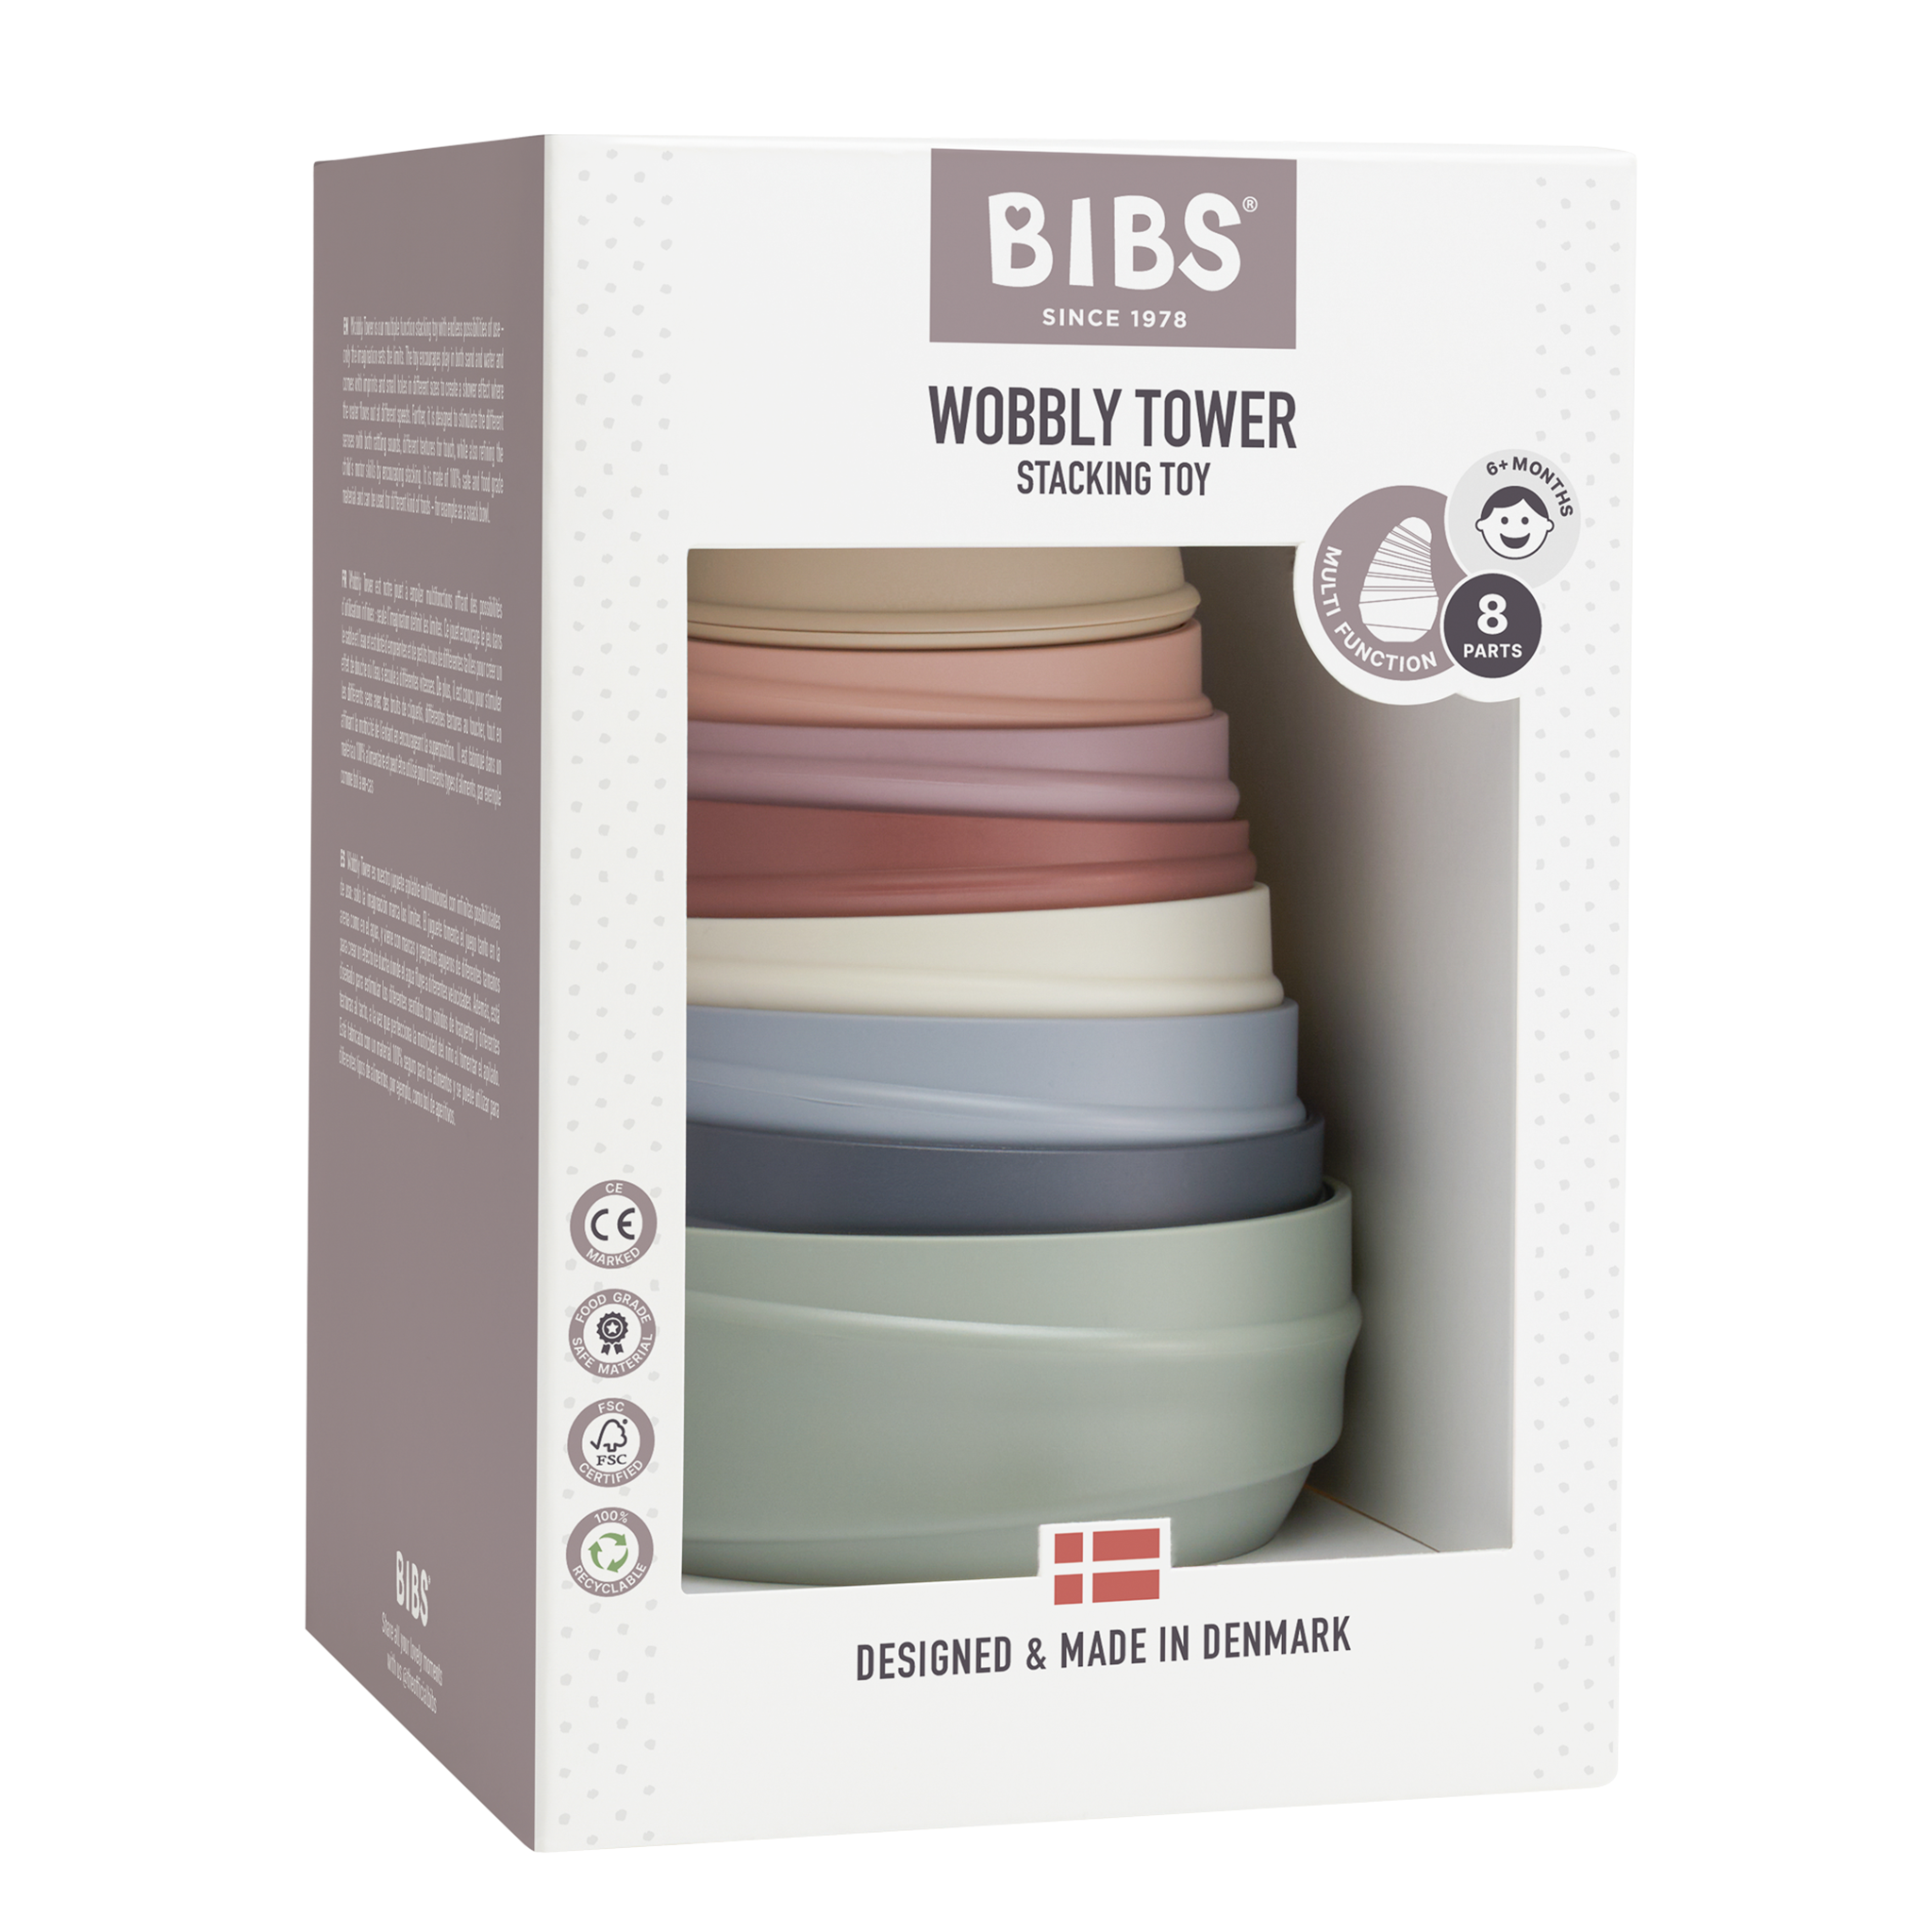 BIBS Wobbly Tower